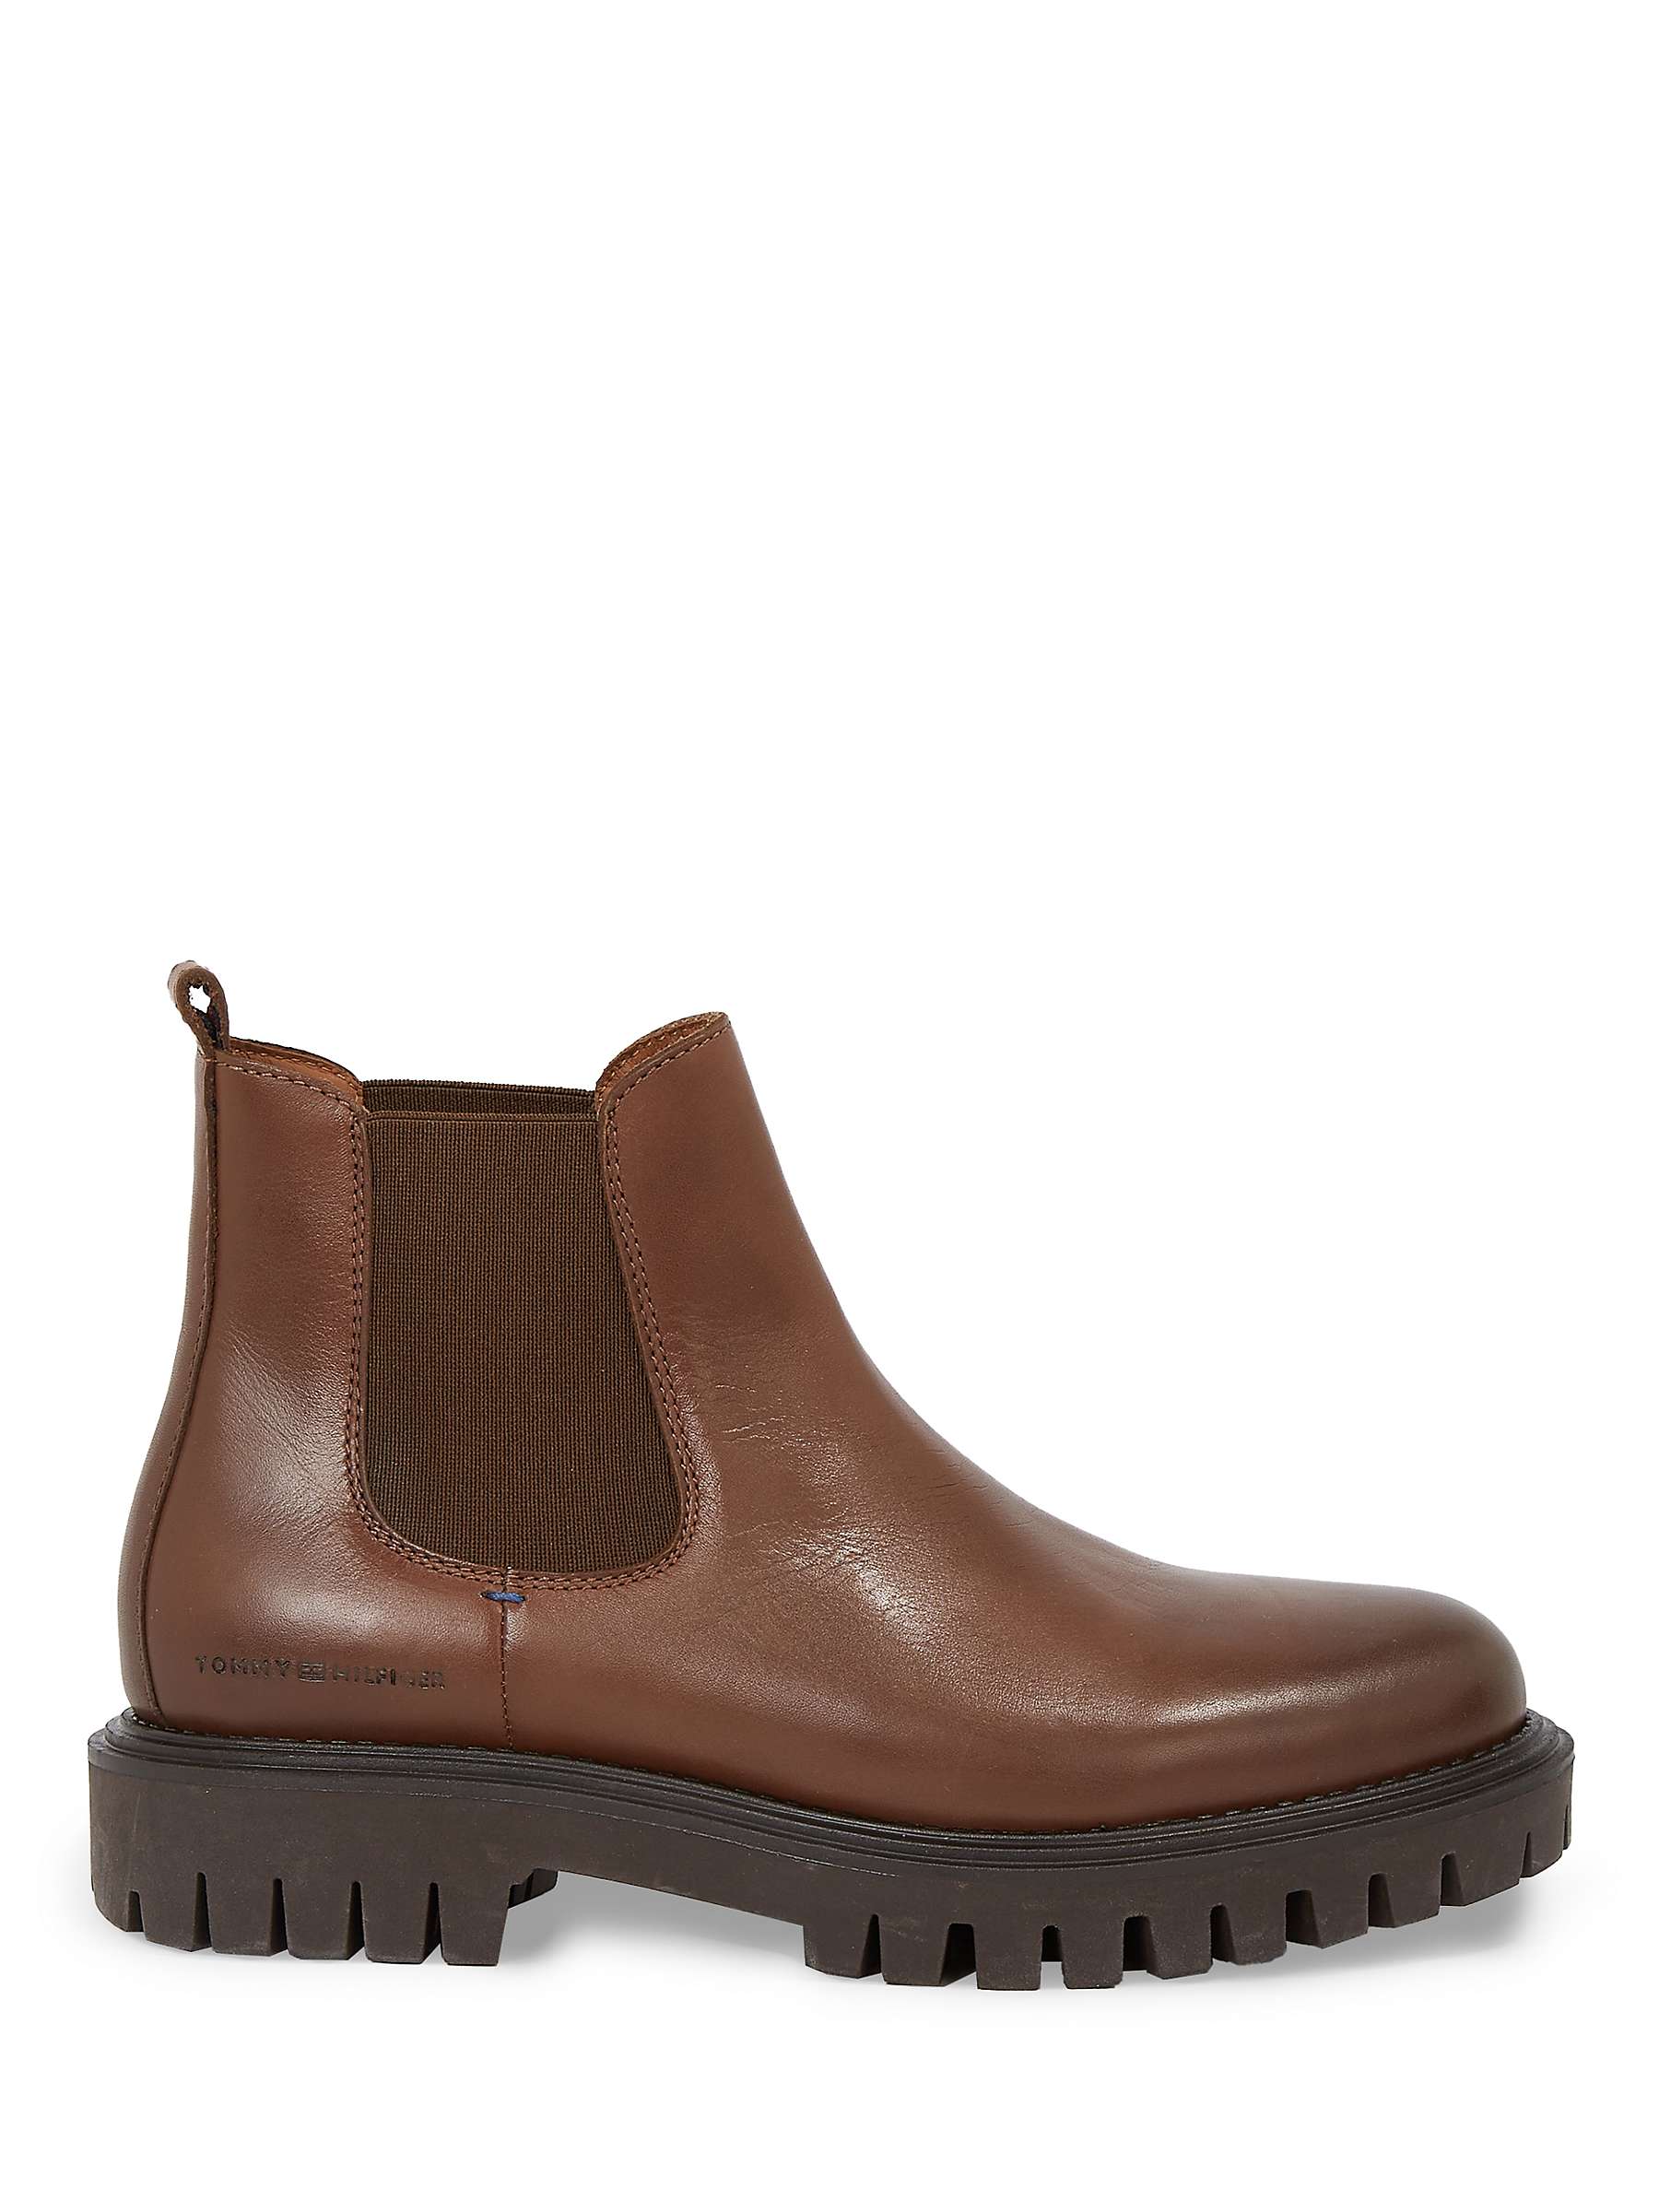 Buy Tommy Hilfiger Chunky Leather Chelsea Boots, Black Online at johnlewis.com